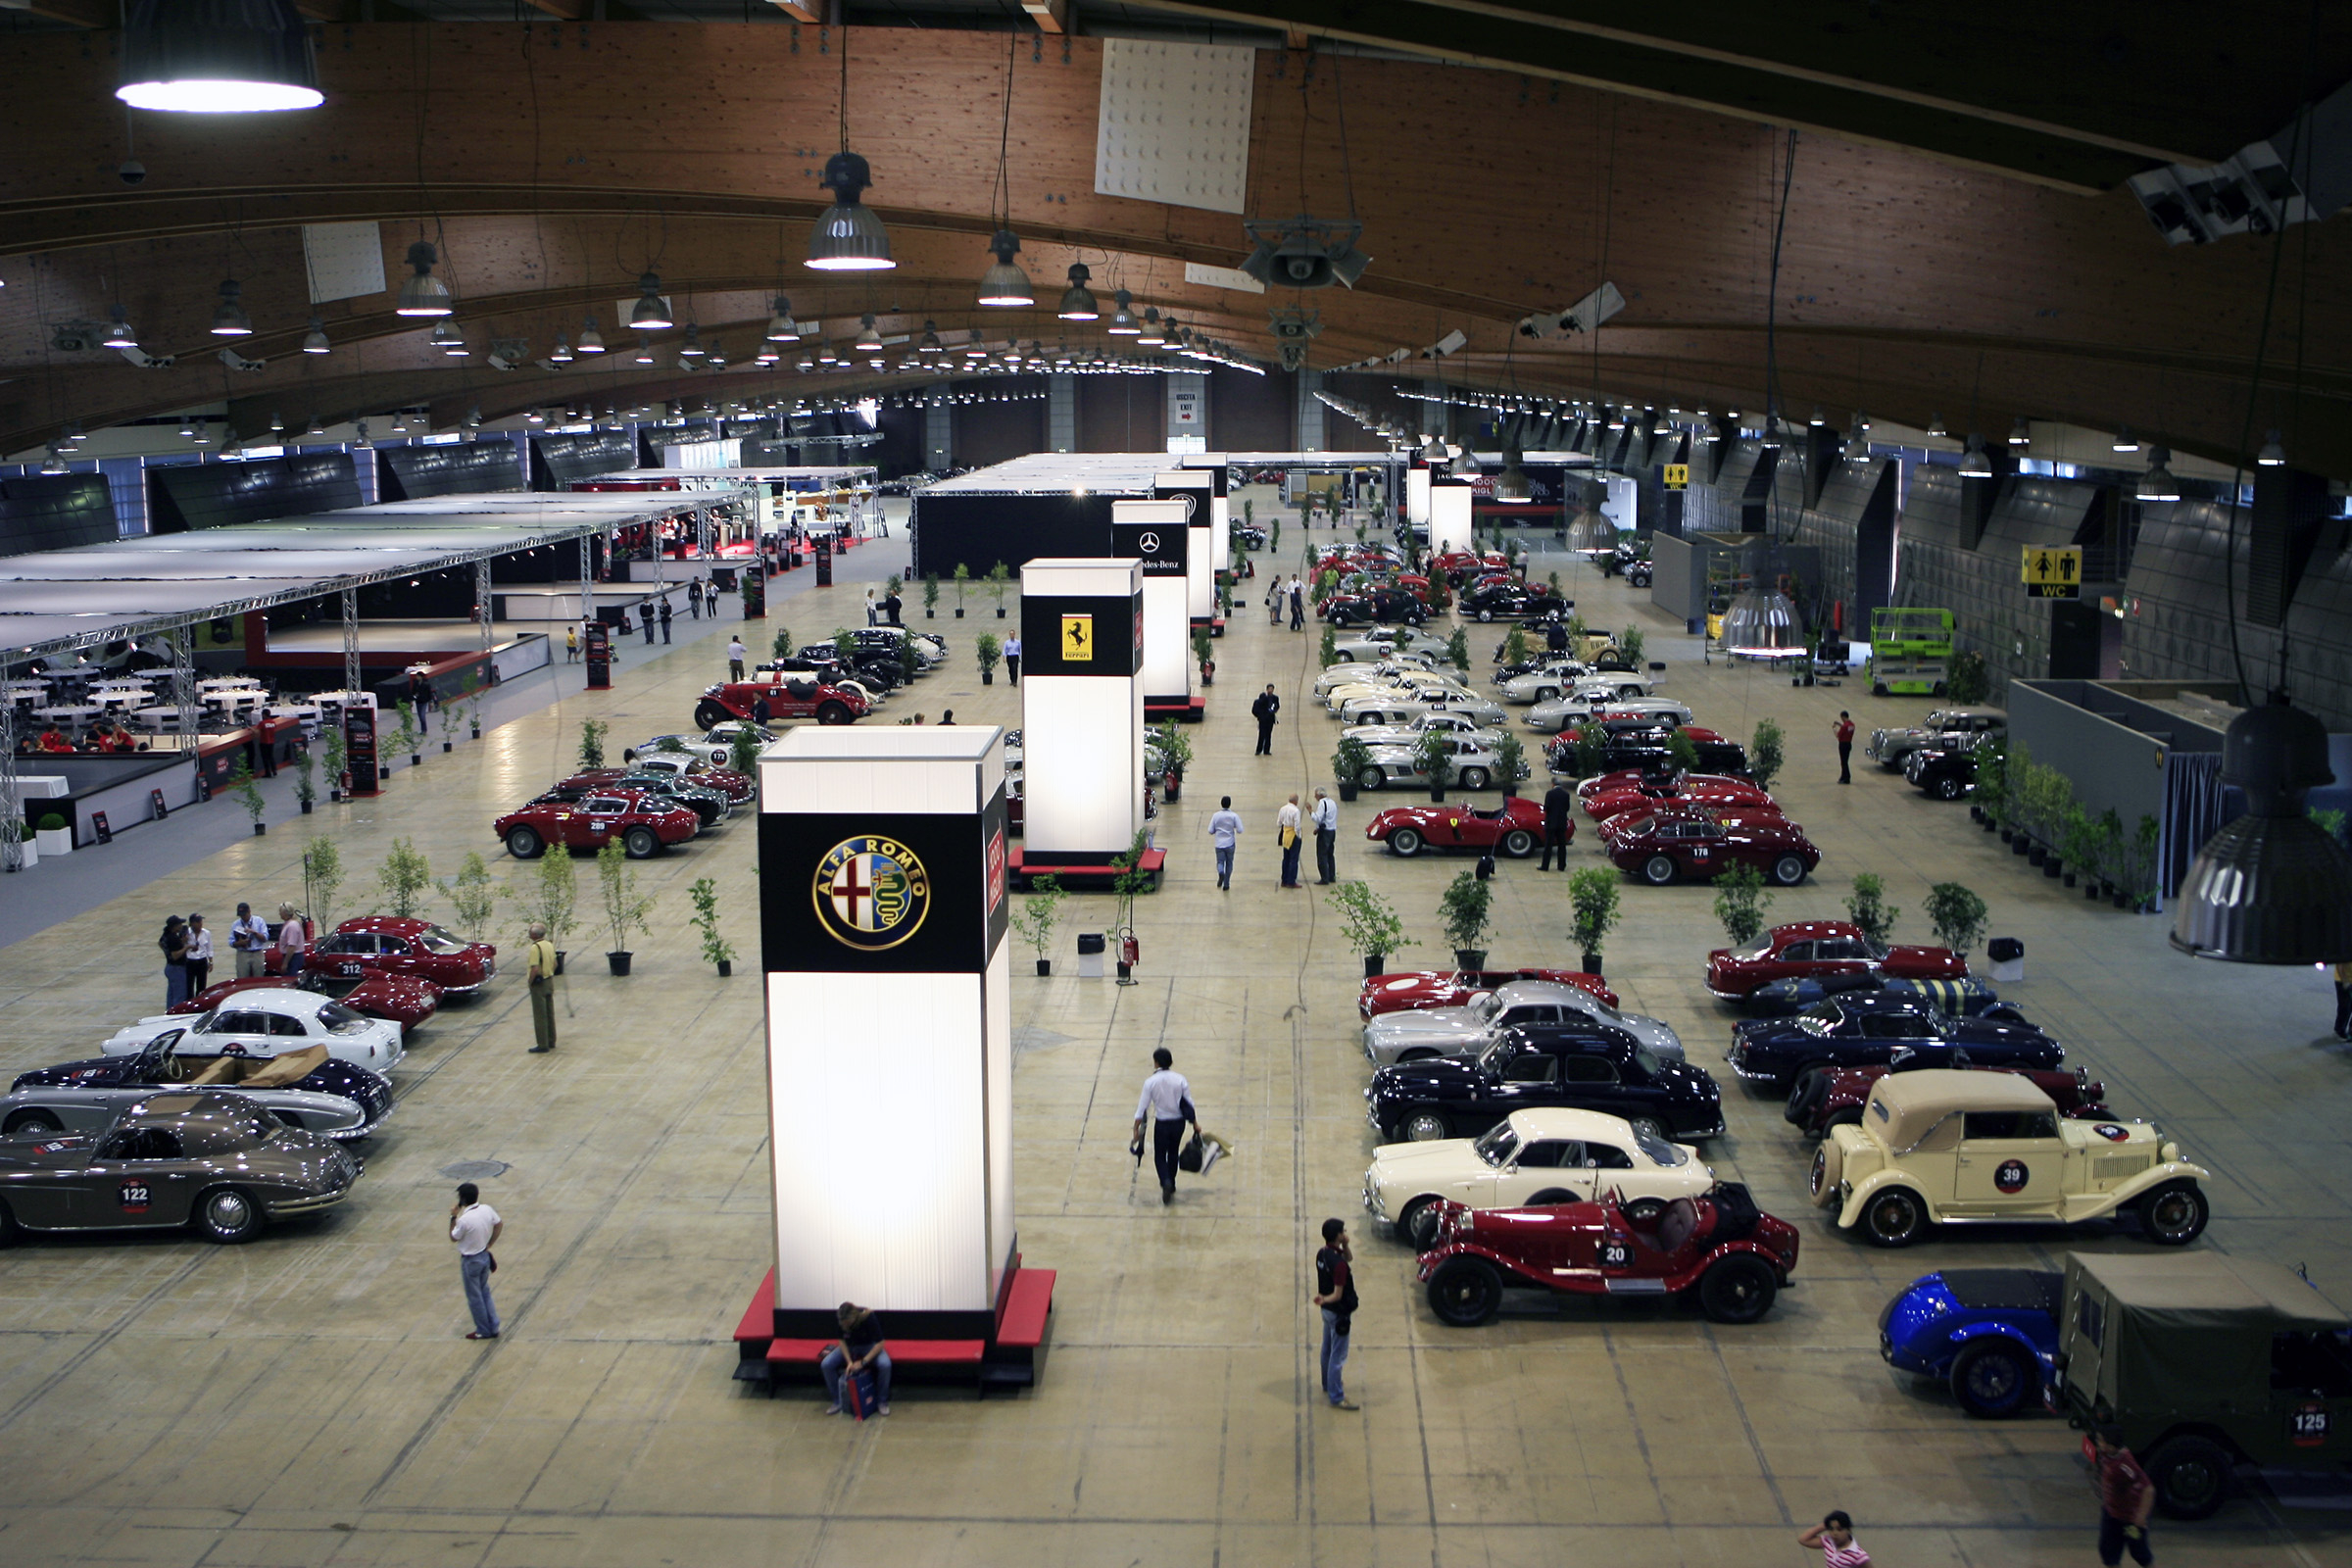 Scrutineering in the expo hall was strickly for participants  (2008)